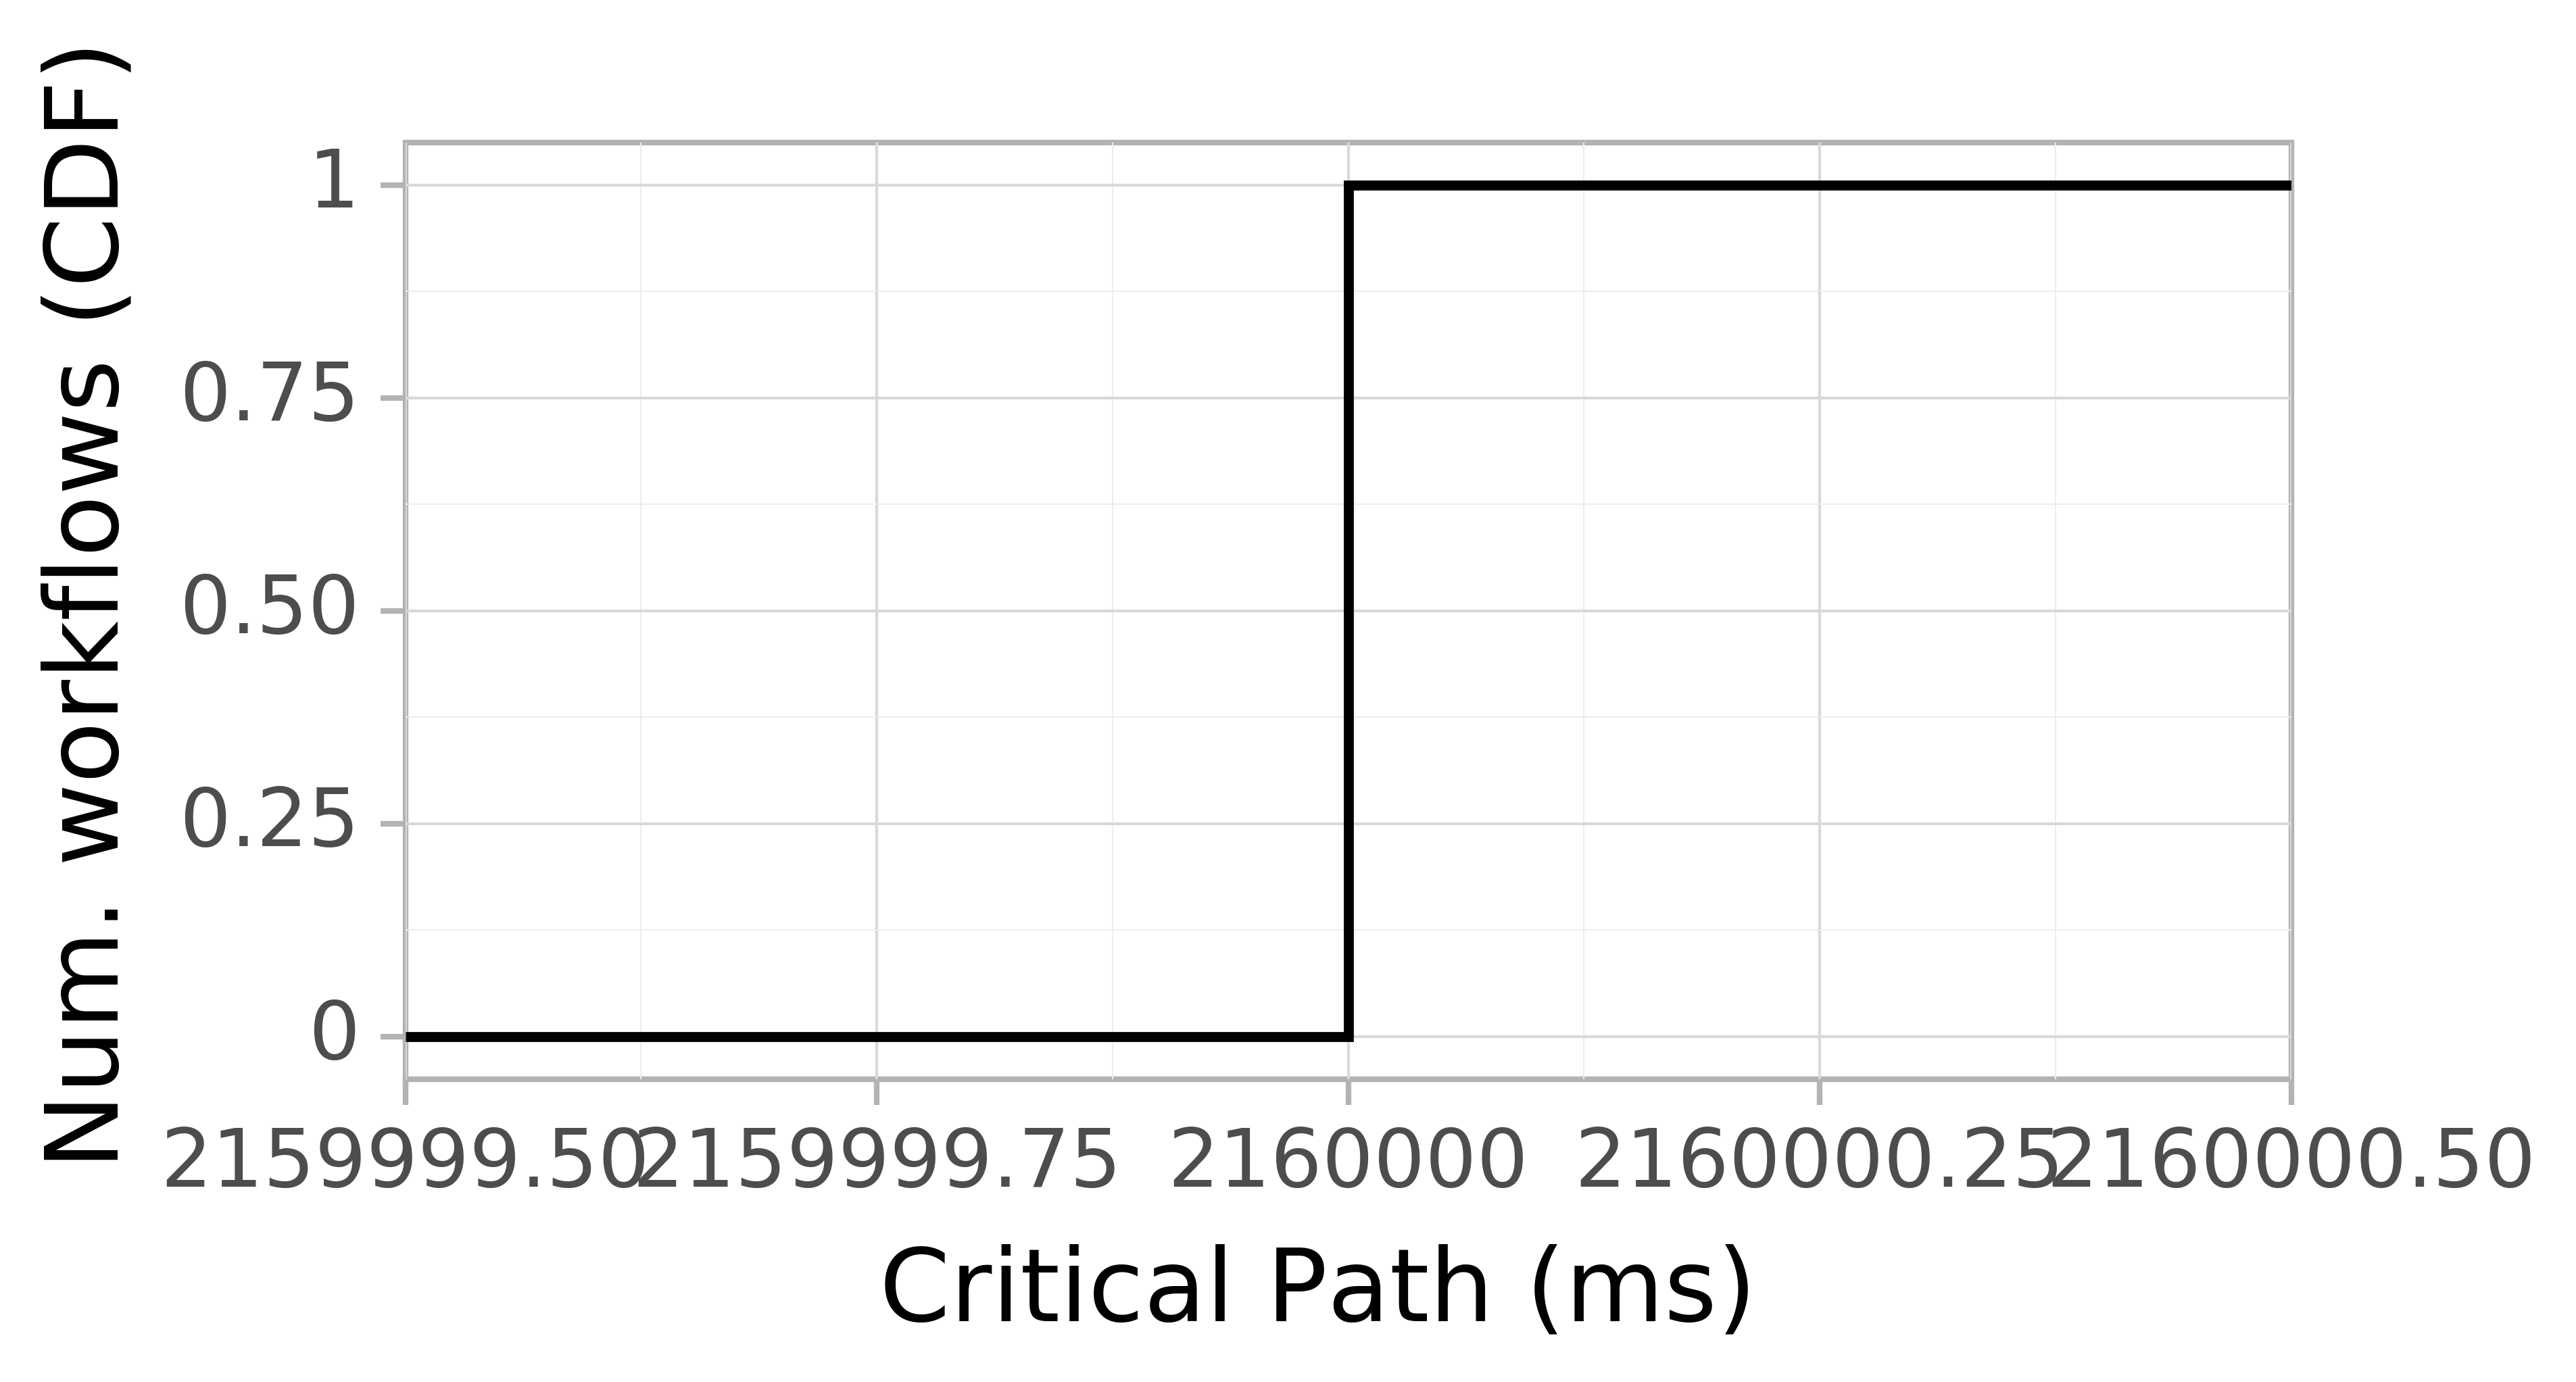 Job runtime CDF graph for the Pegasus_P4 trace.